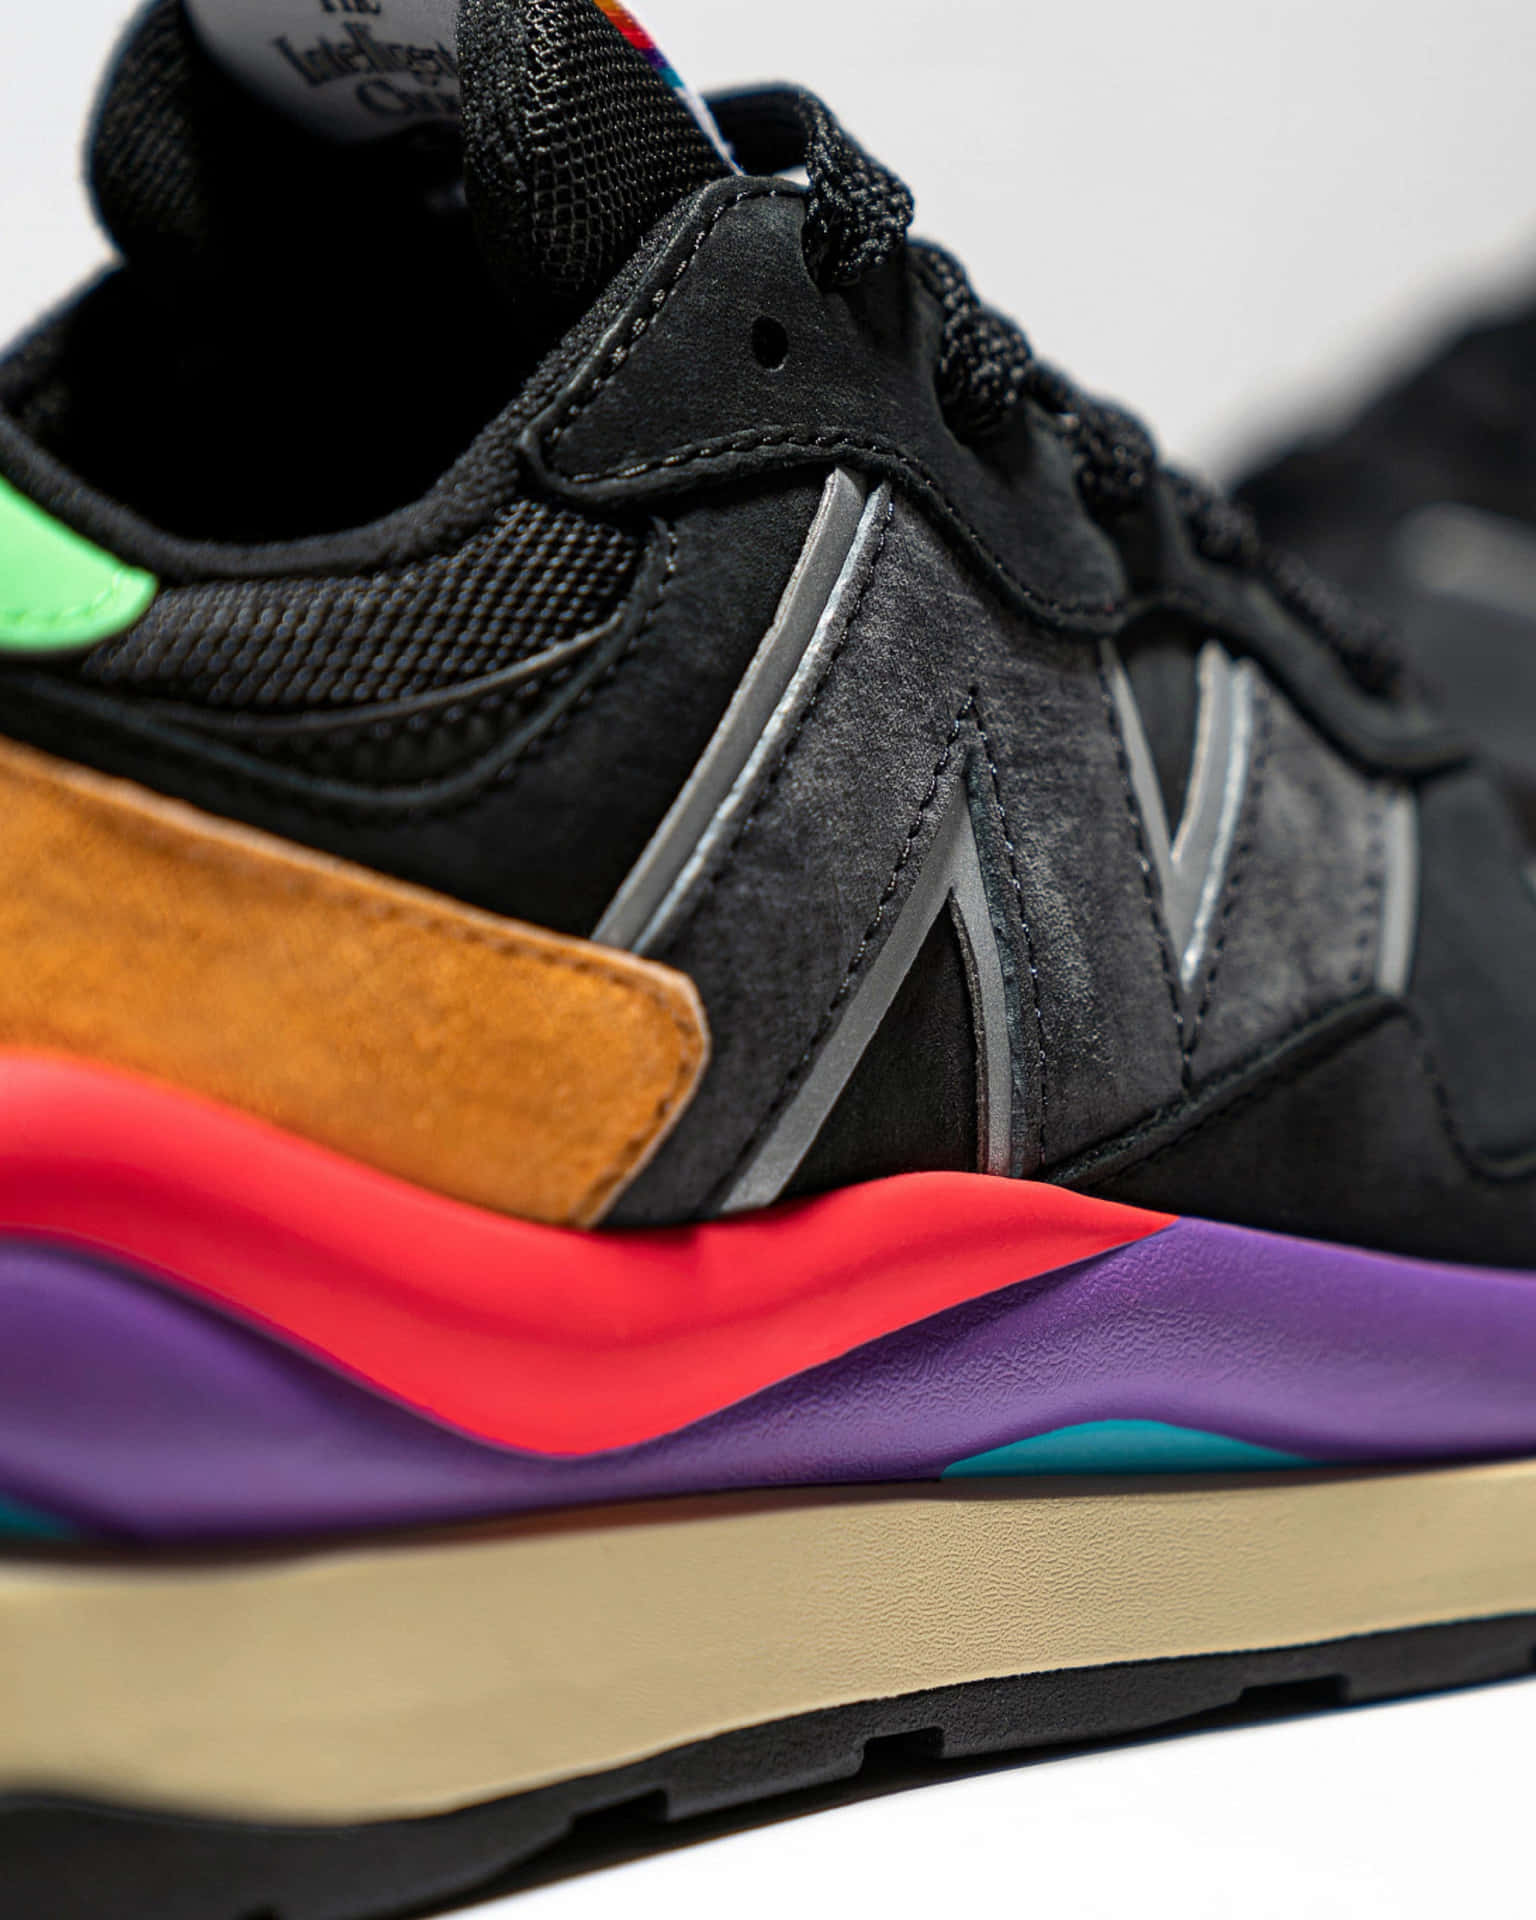 Lead Your Path In Style With The New Balance Collection.